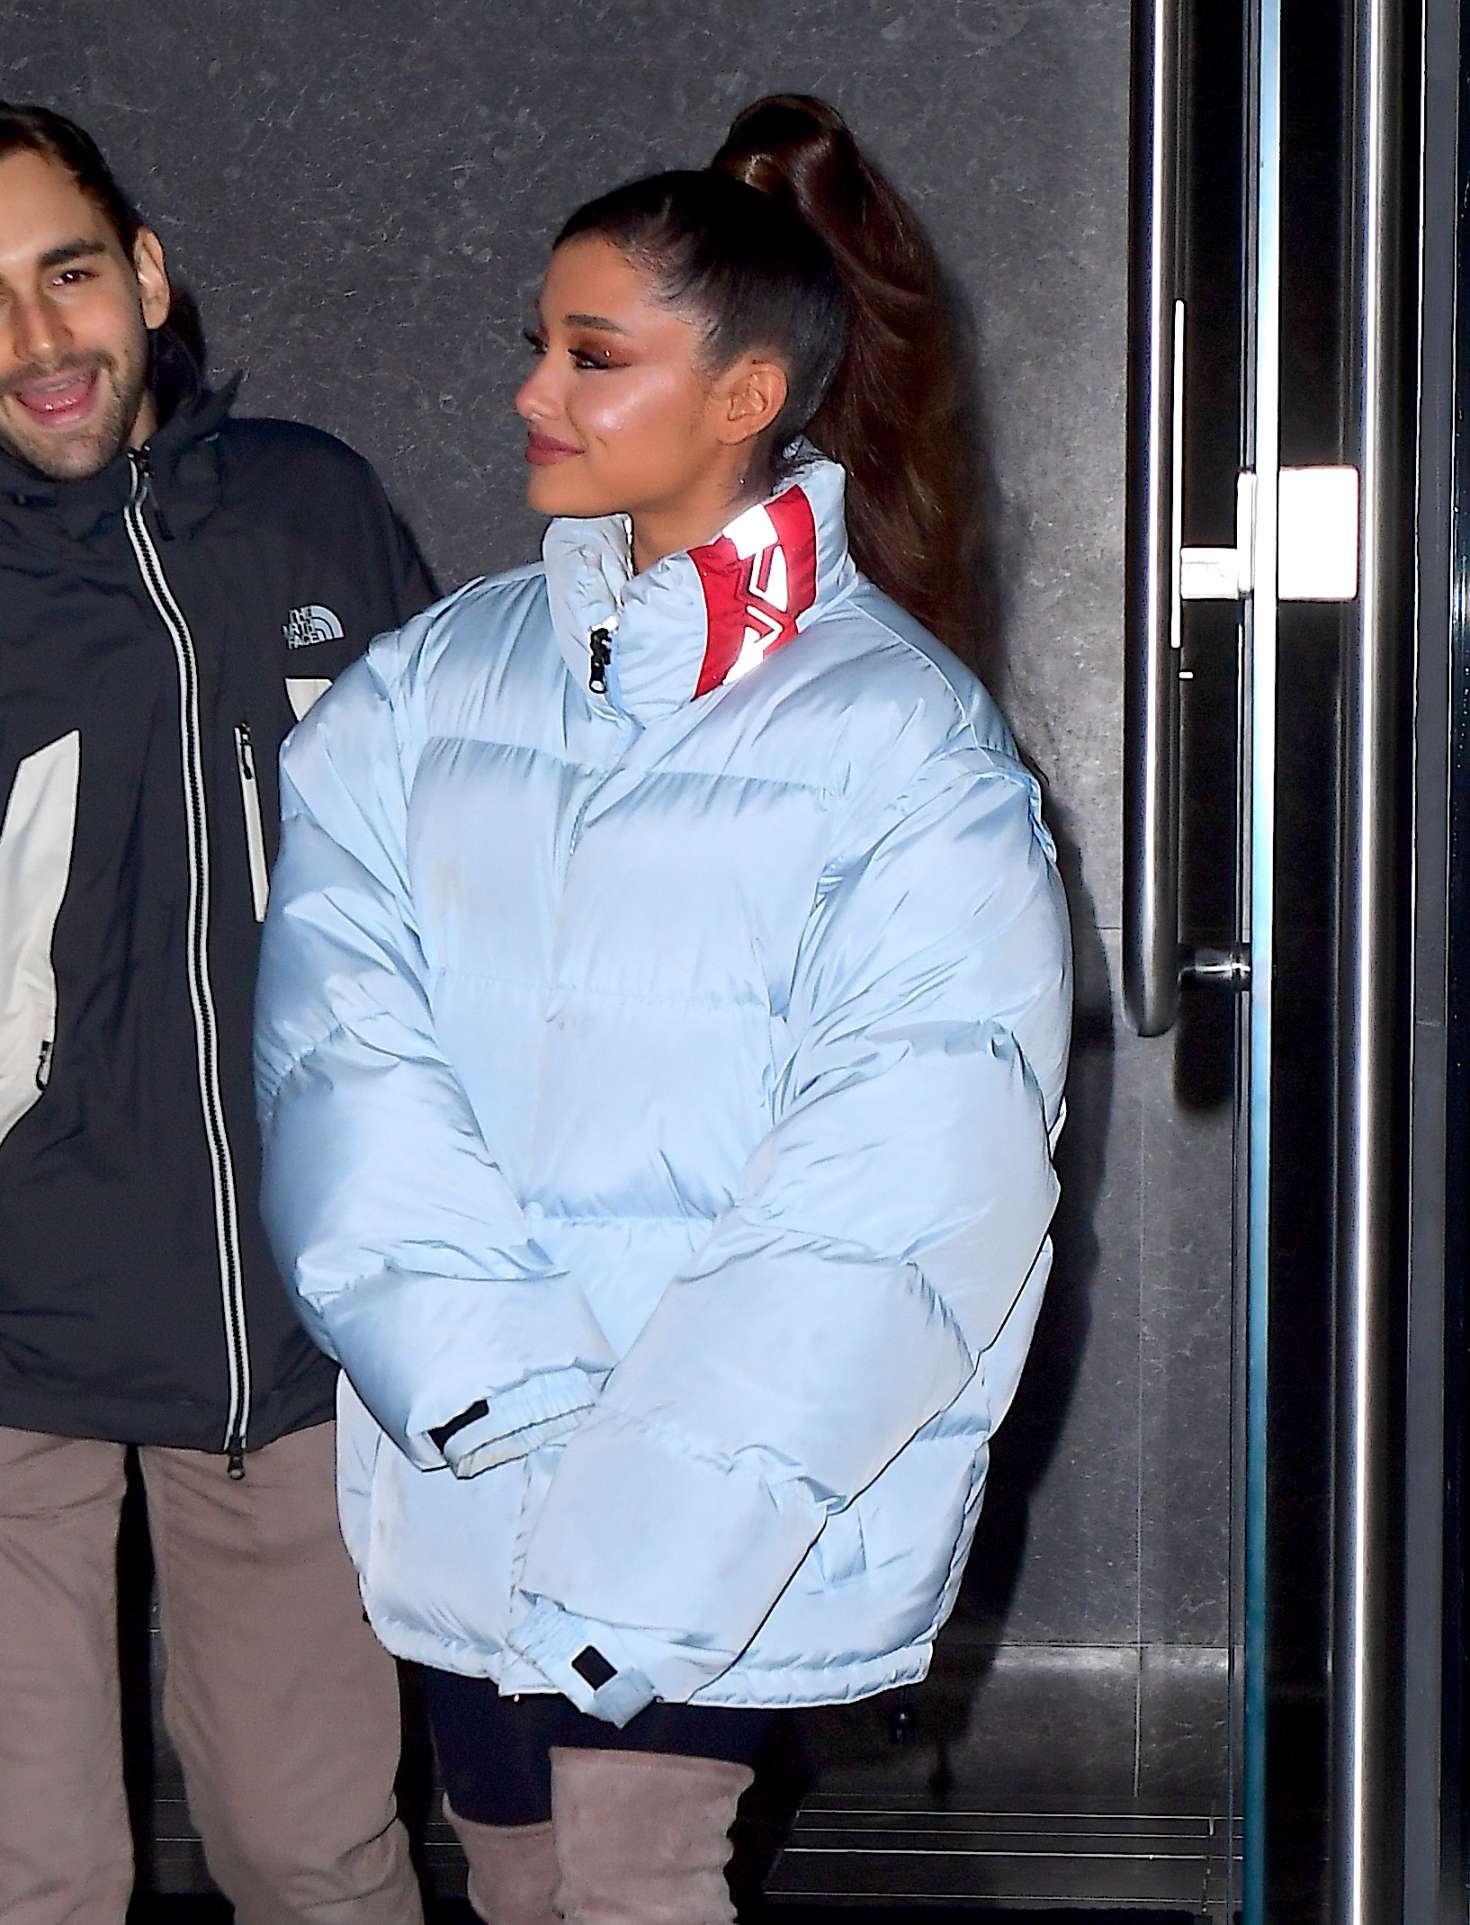 Ariana Grande â€“ Leaving a building in New York